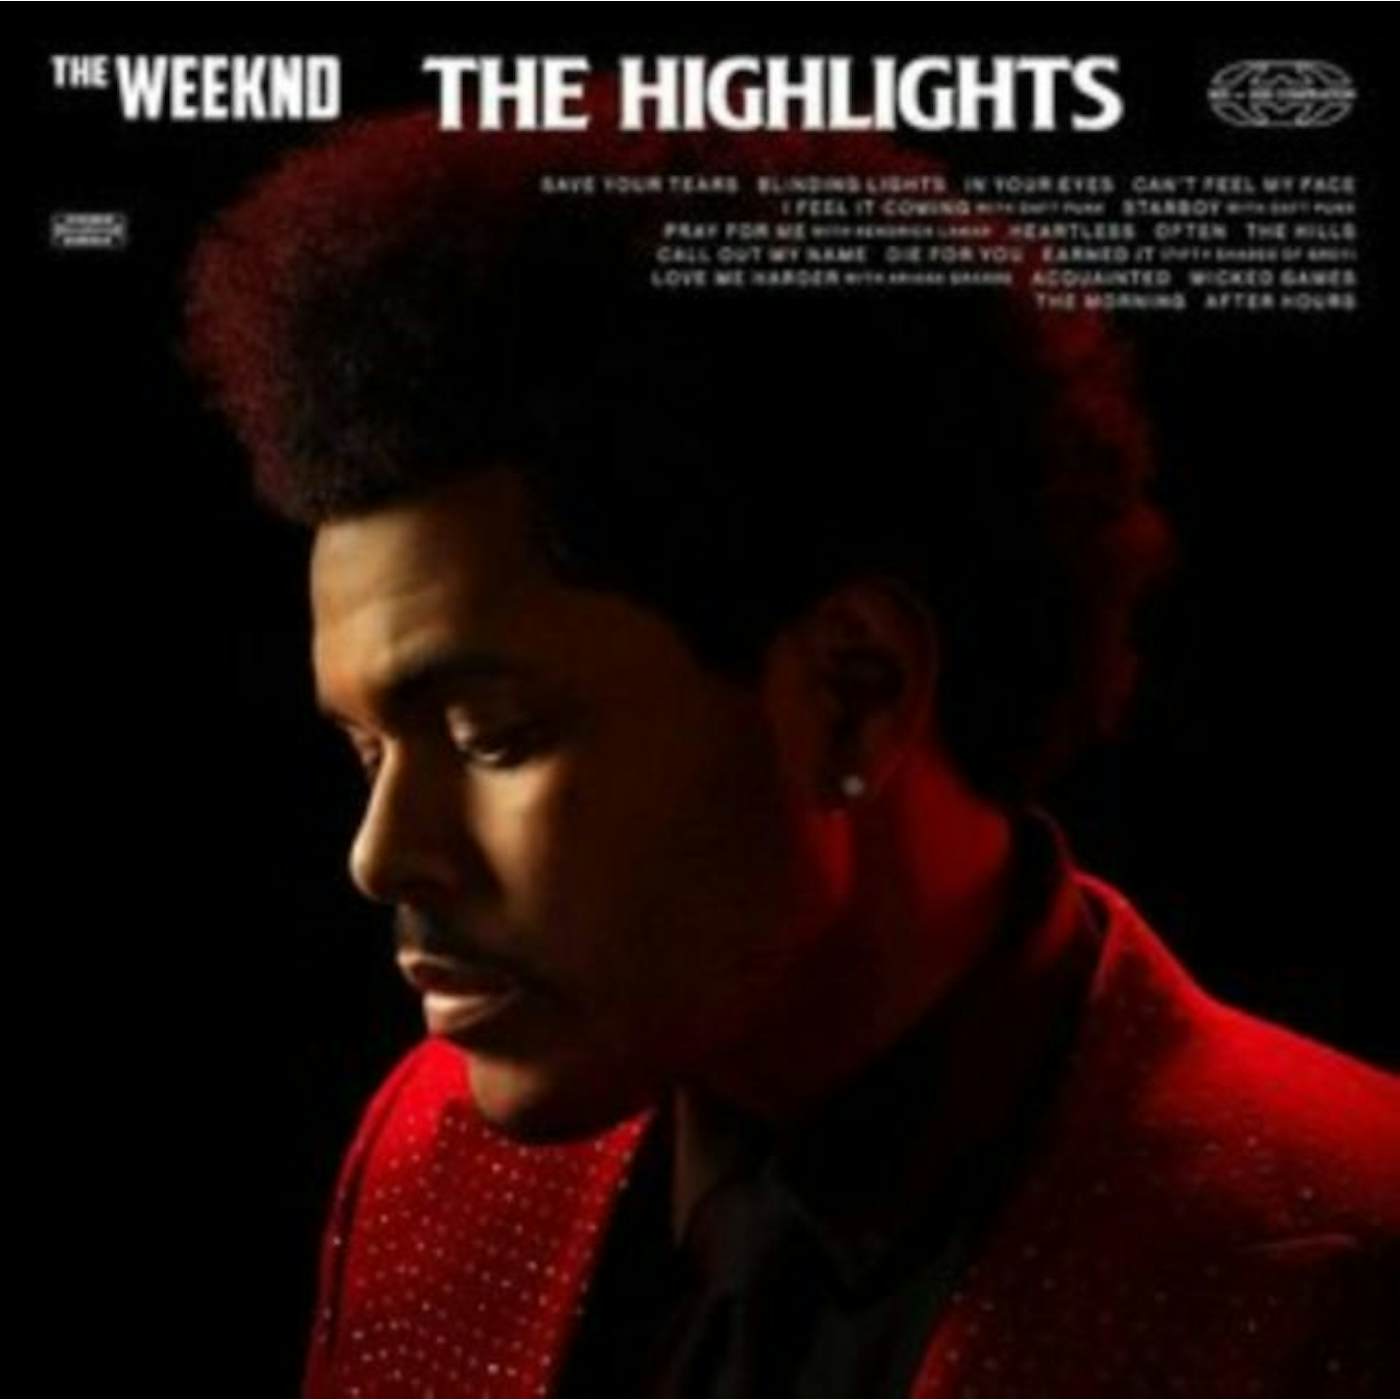 The Weeknd LP Vinyl Record - The Highlights